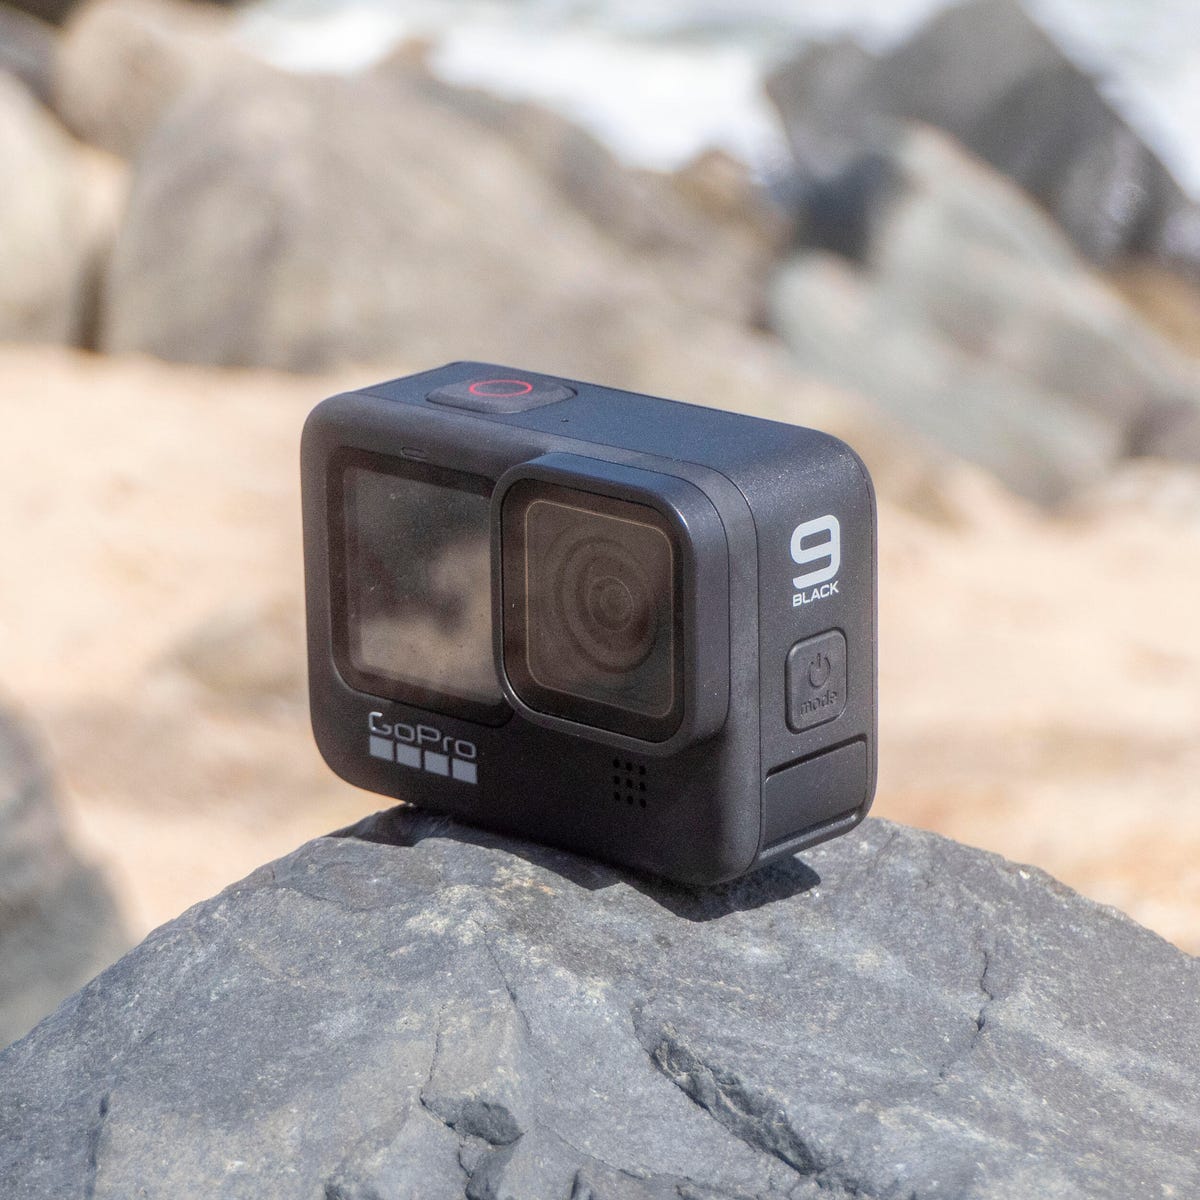 GoPro Hero 9 Black hands-on: All the tools to tell your story - CNET